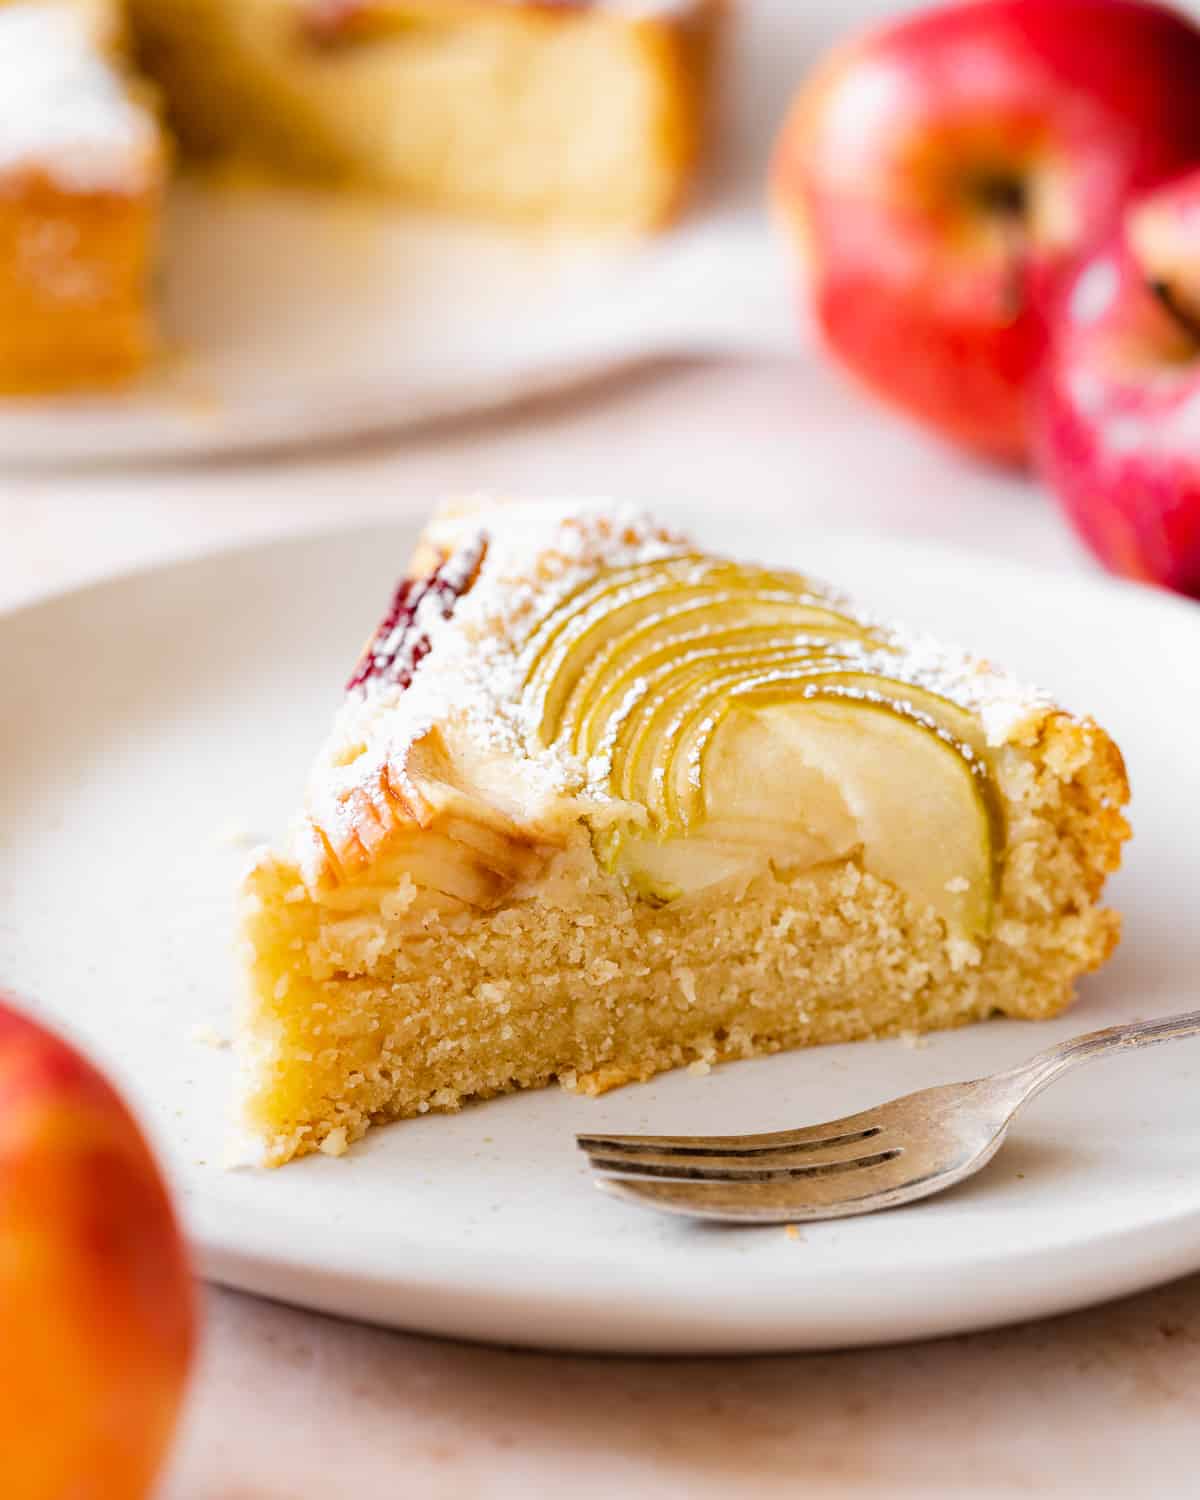 slice of cake with apple topping on a plate with a fork next to it, and red apples scattered around.